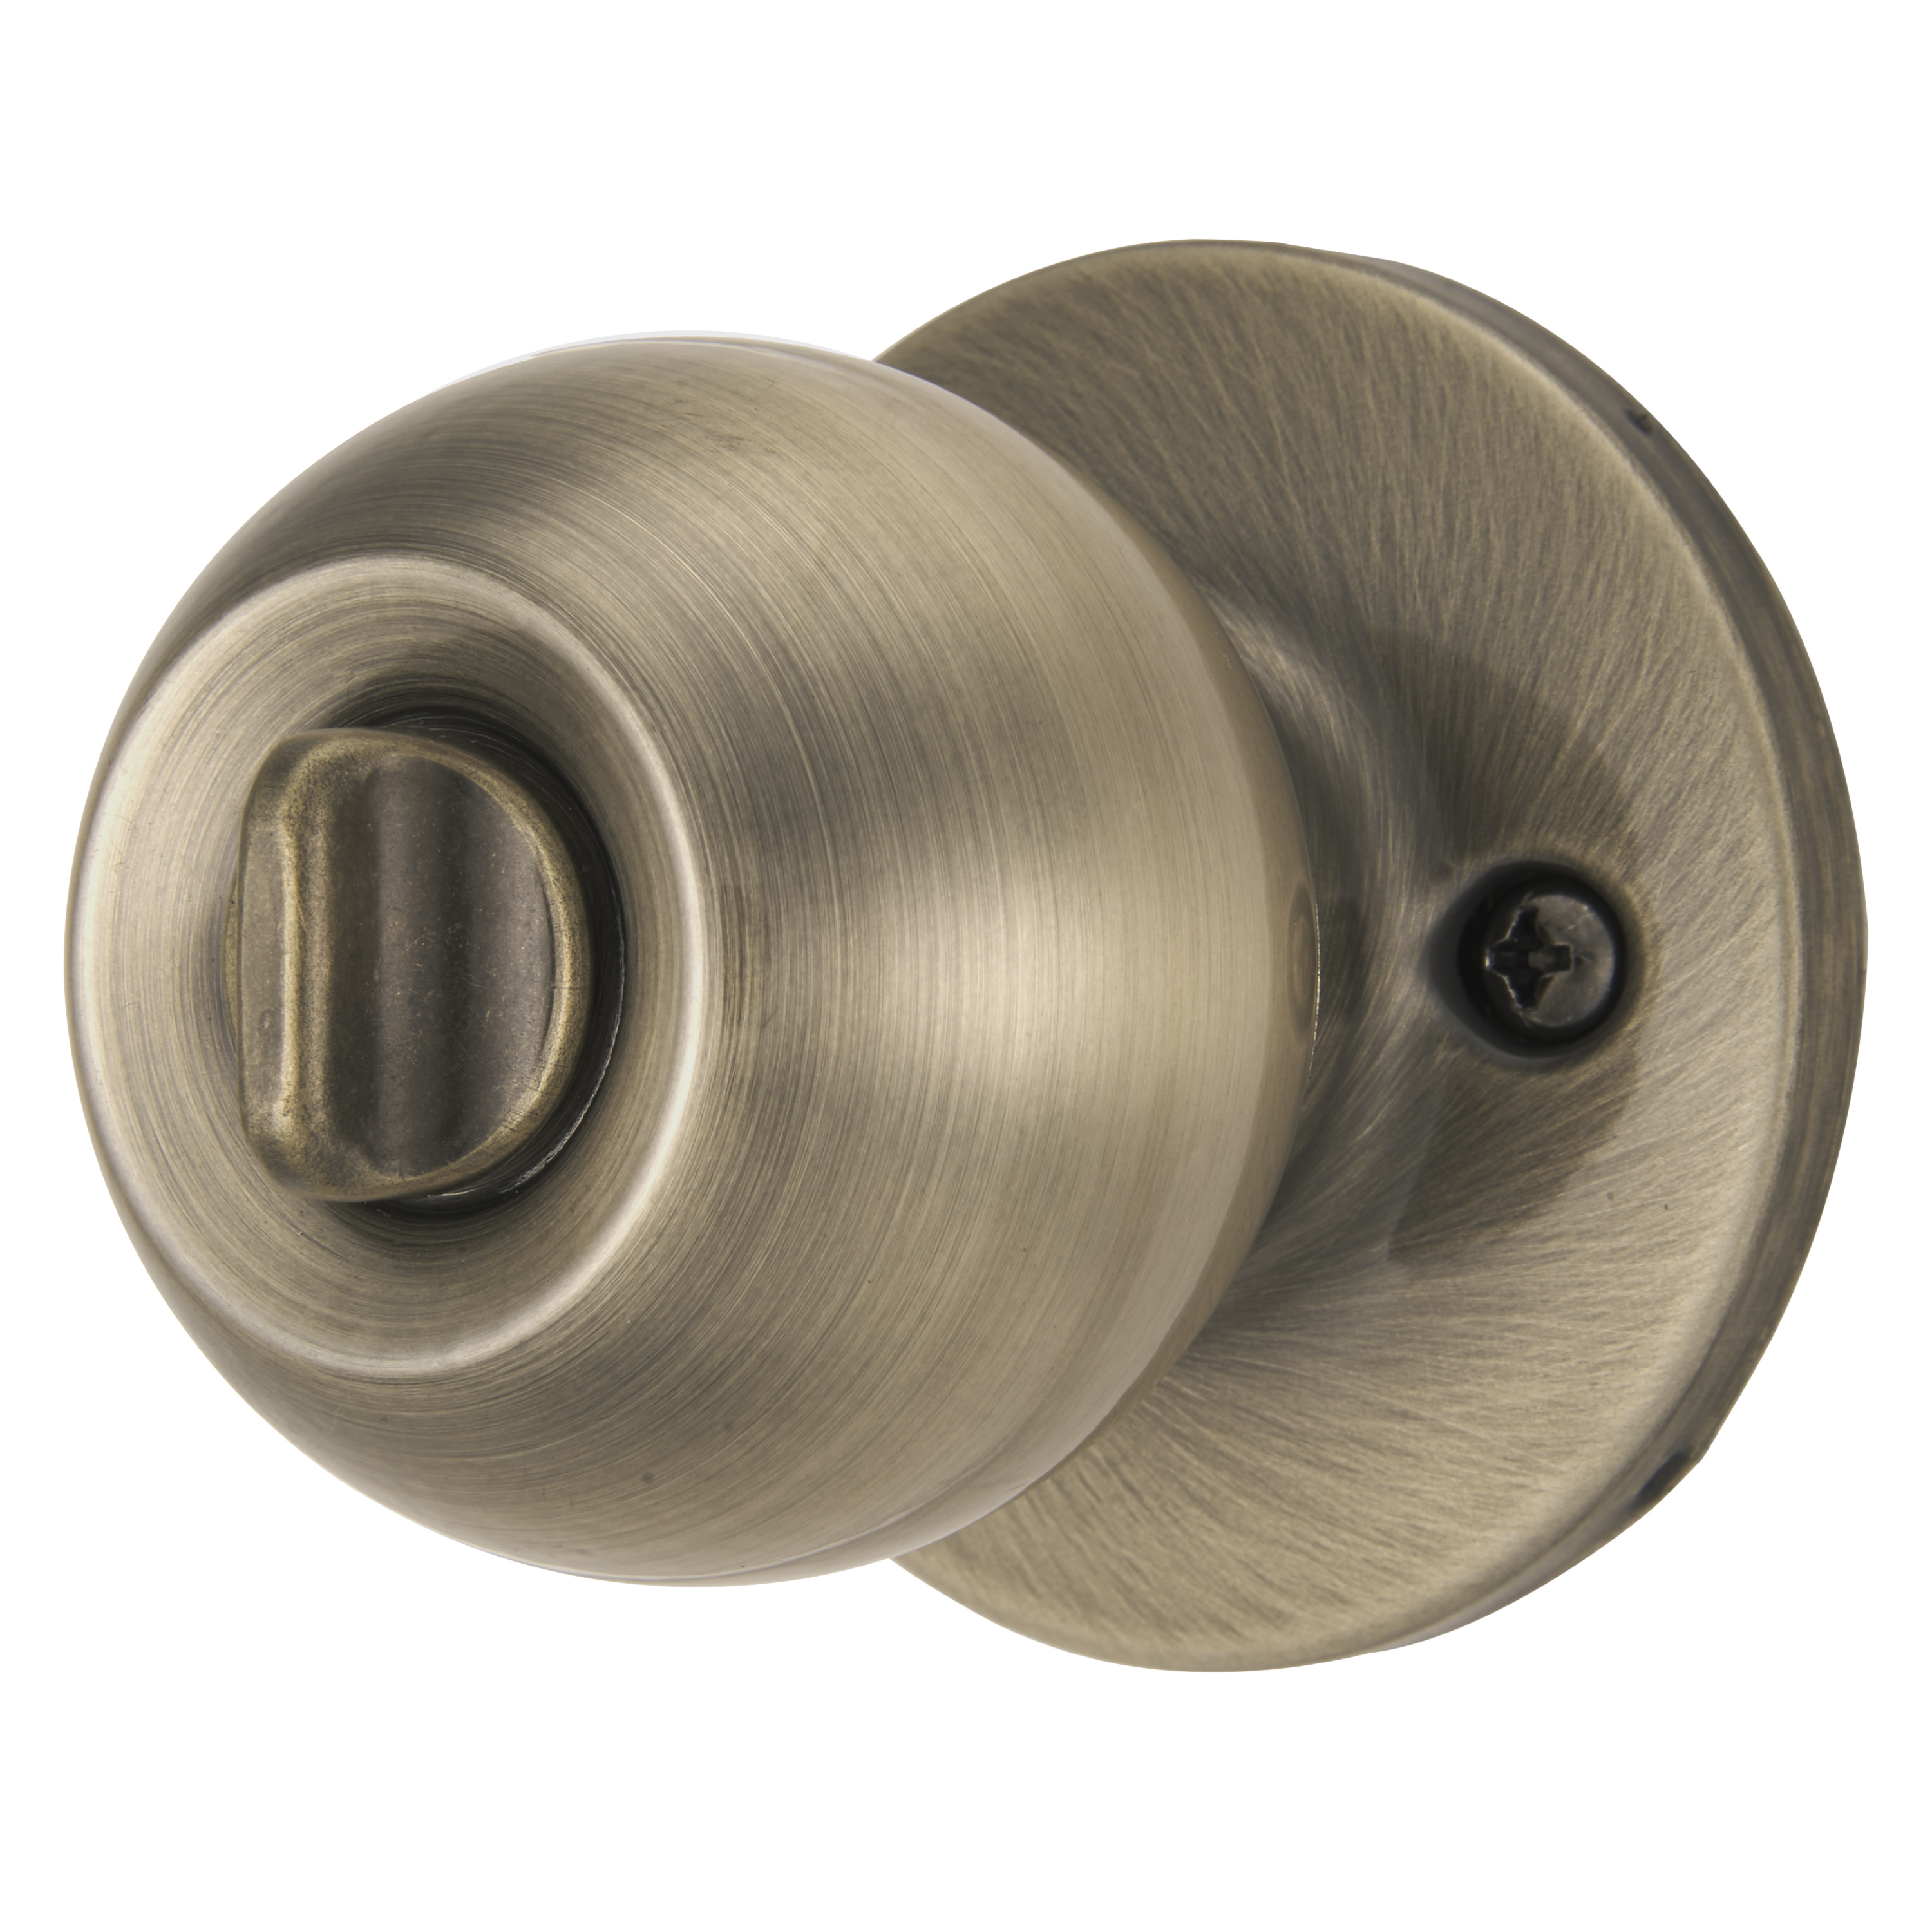 Brinks Keyed Entry Ball Style Doorknob and Deadbolt Combo, Antique Brass Finish, Twin Pack - image 3 of 15